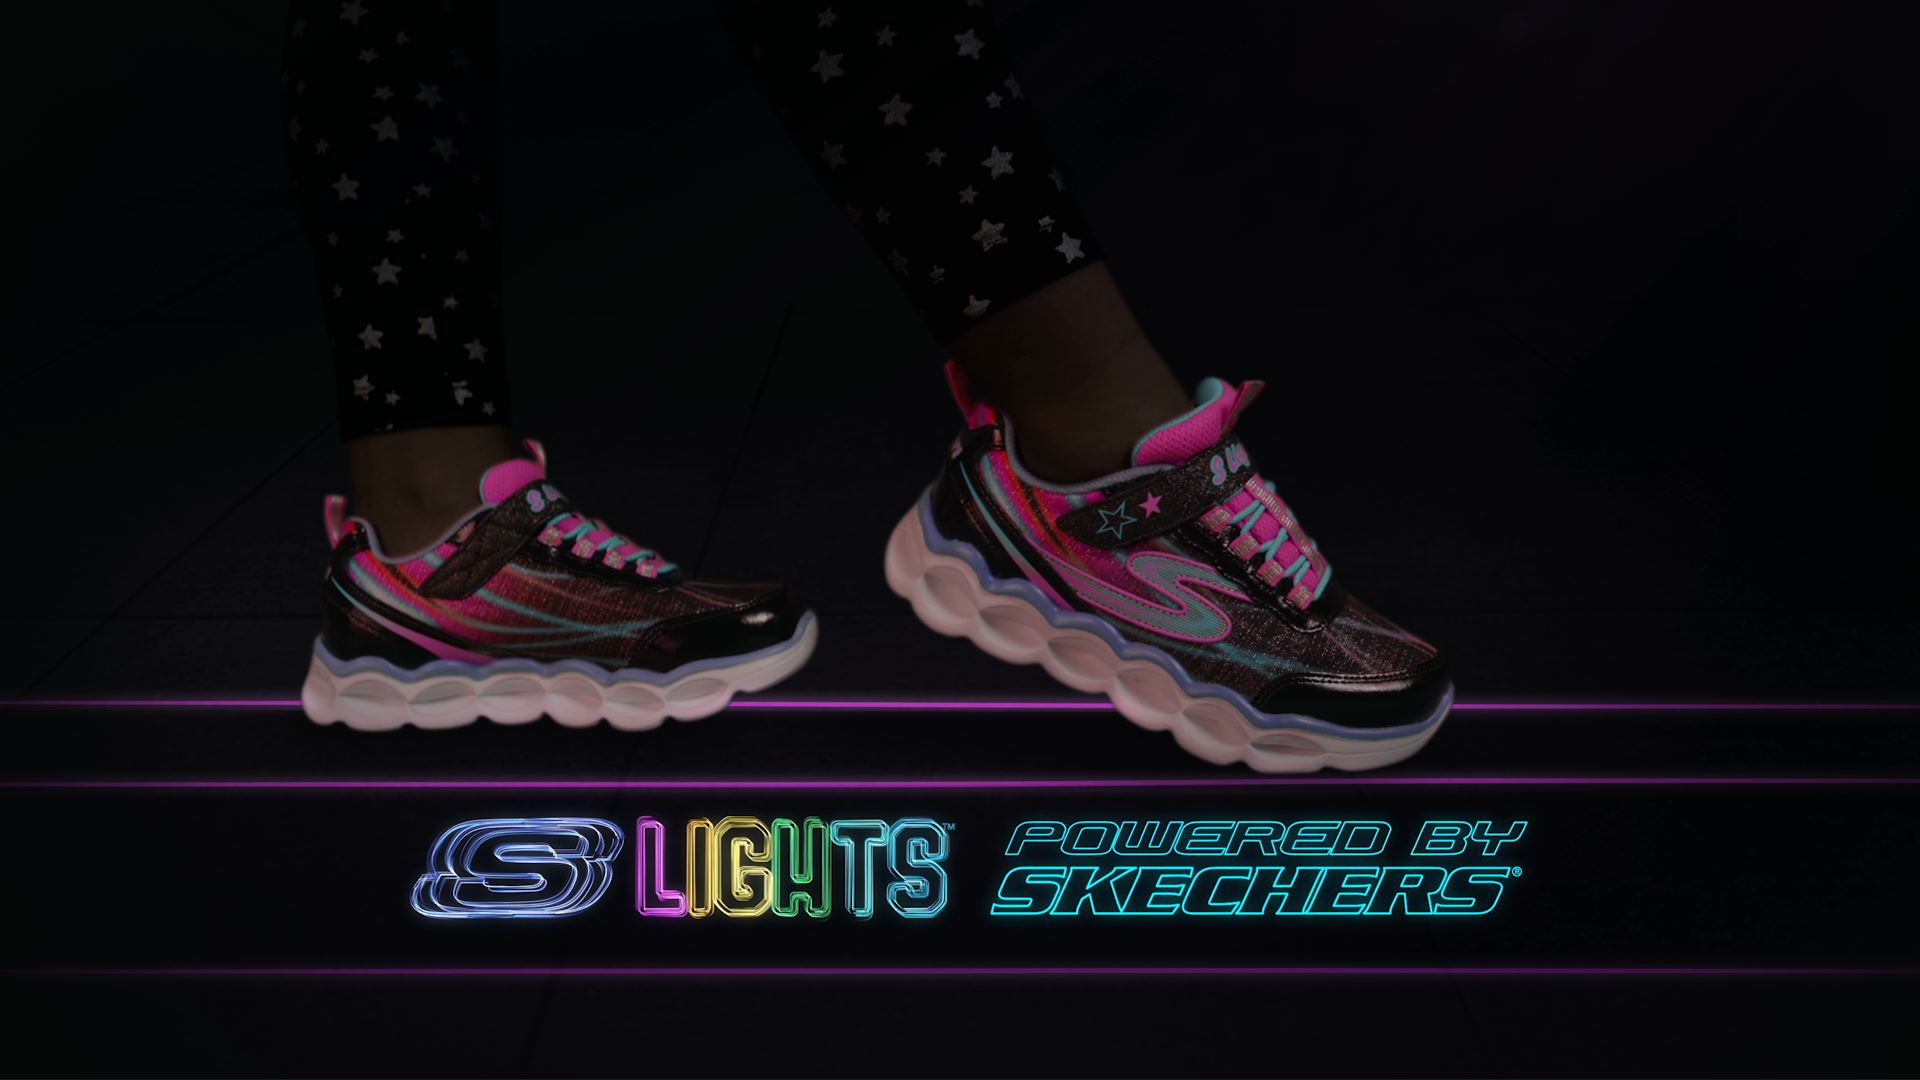 skechers new shoes commercial